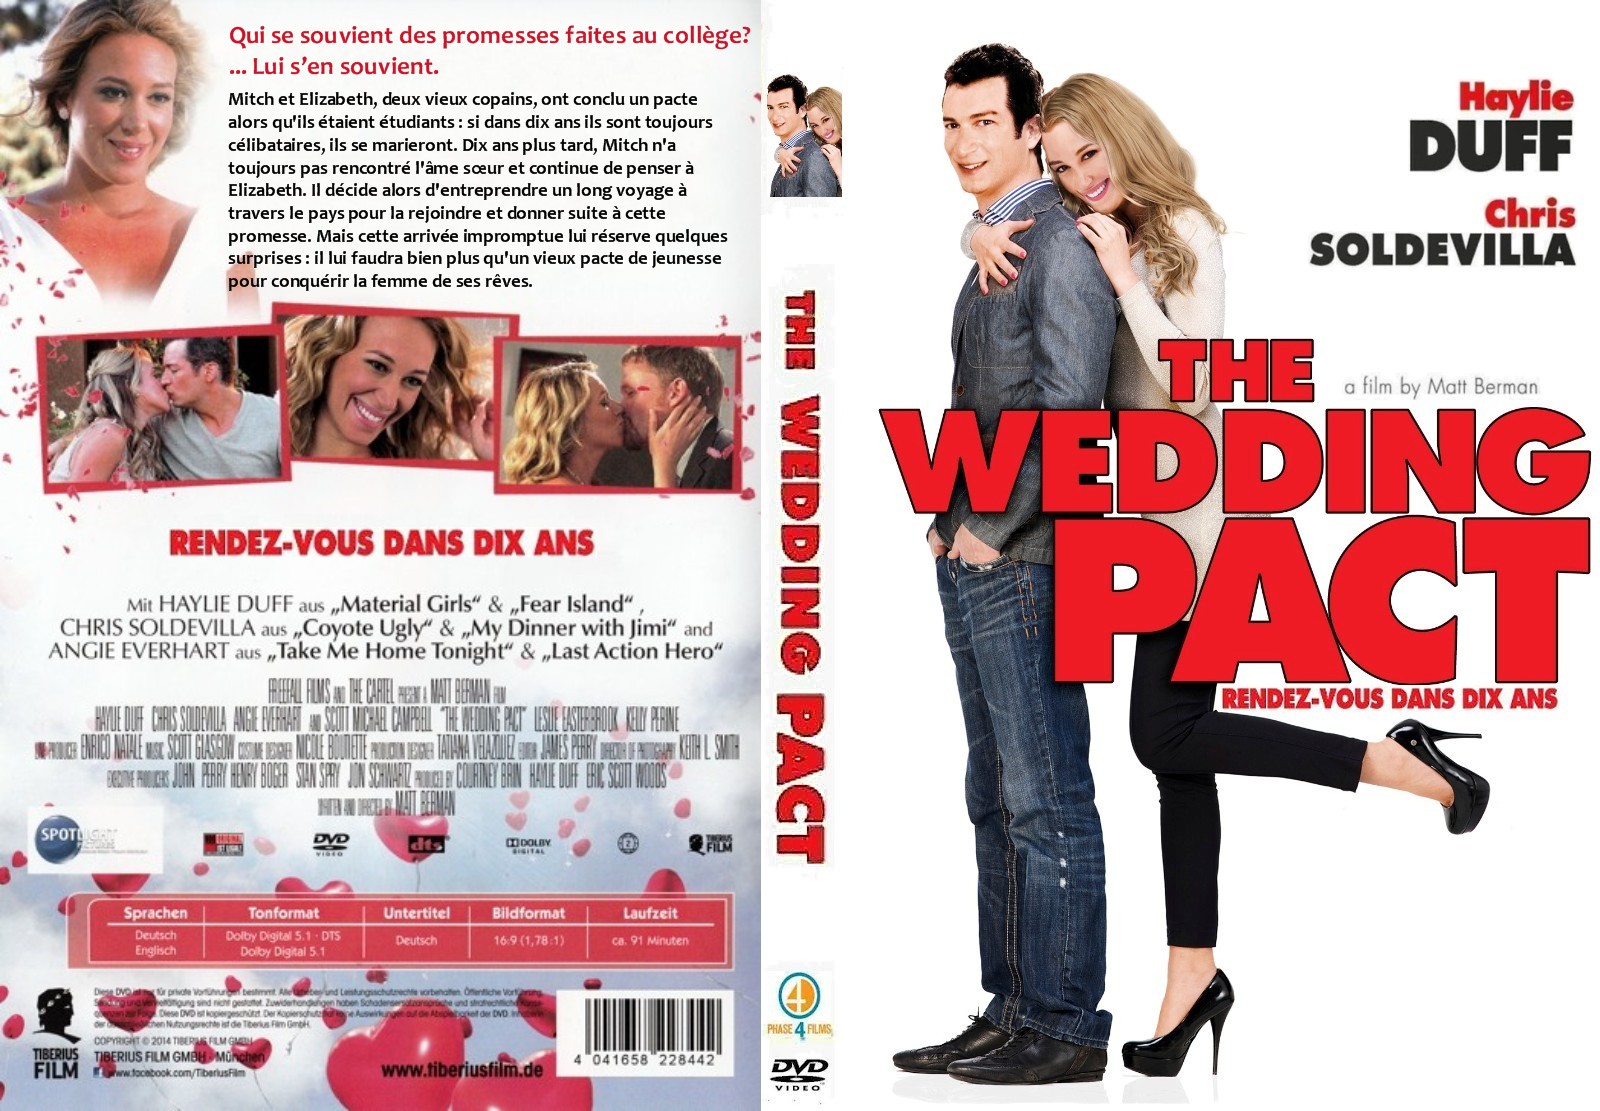 Jaquette DVD The Wedding Pact custom